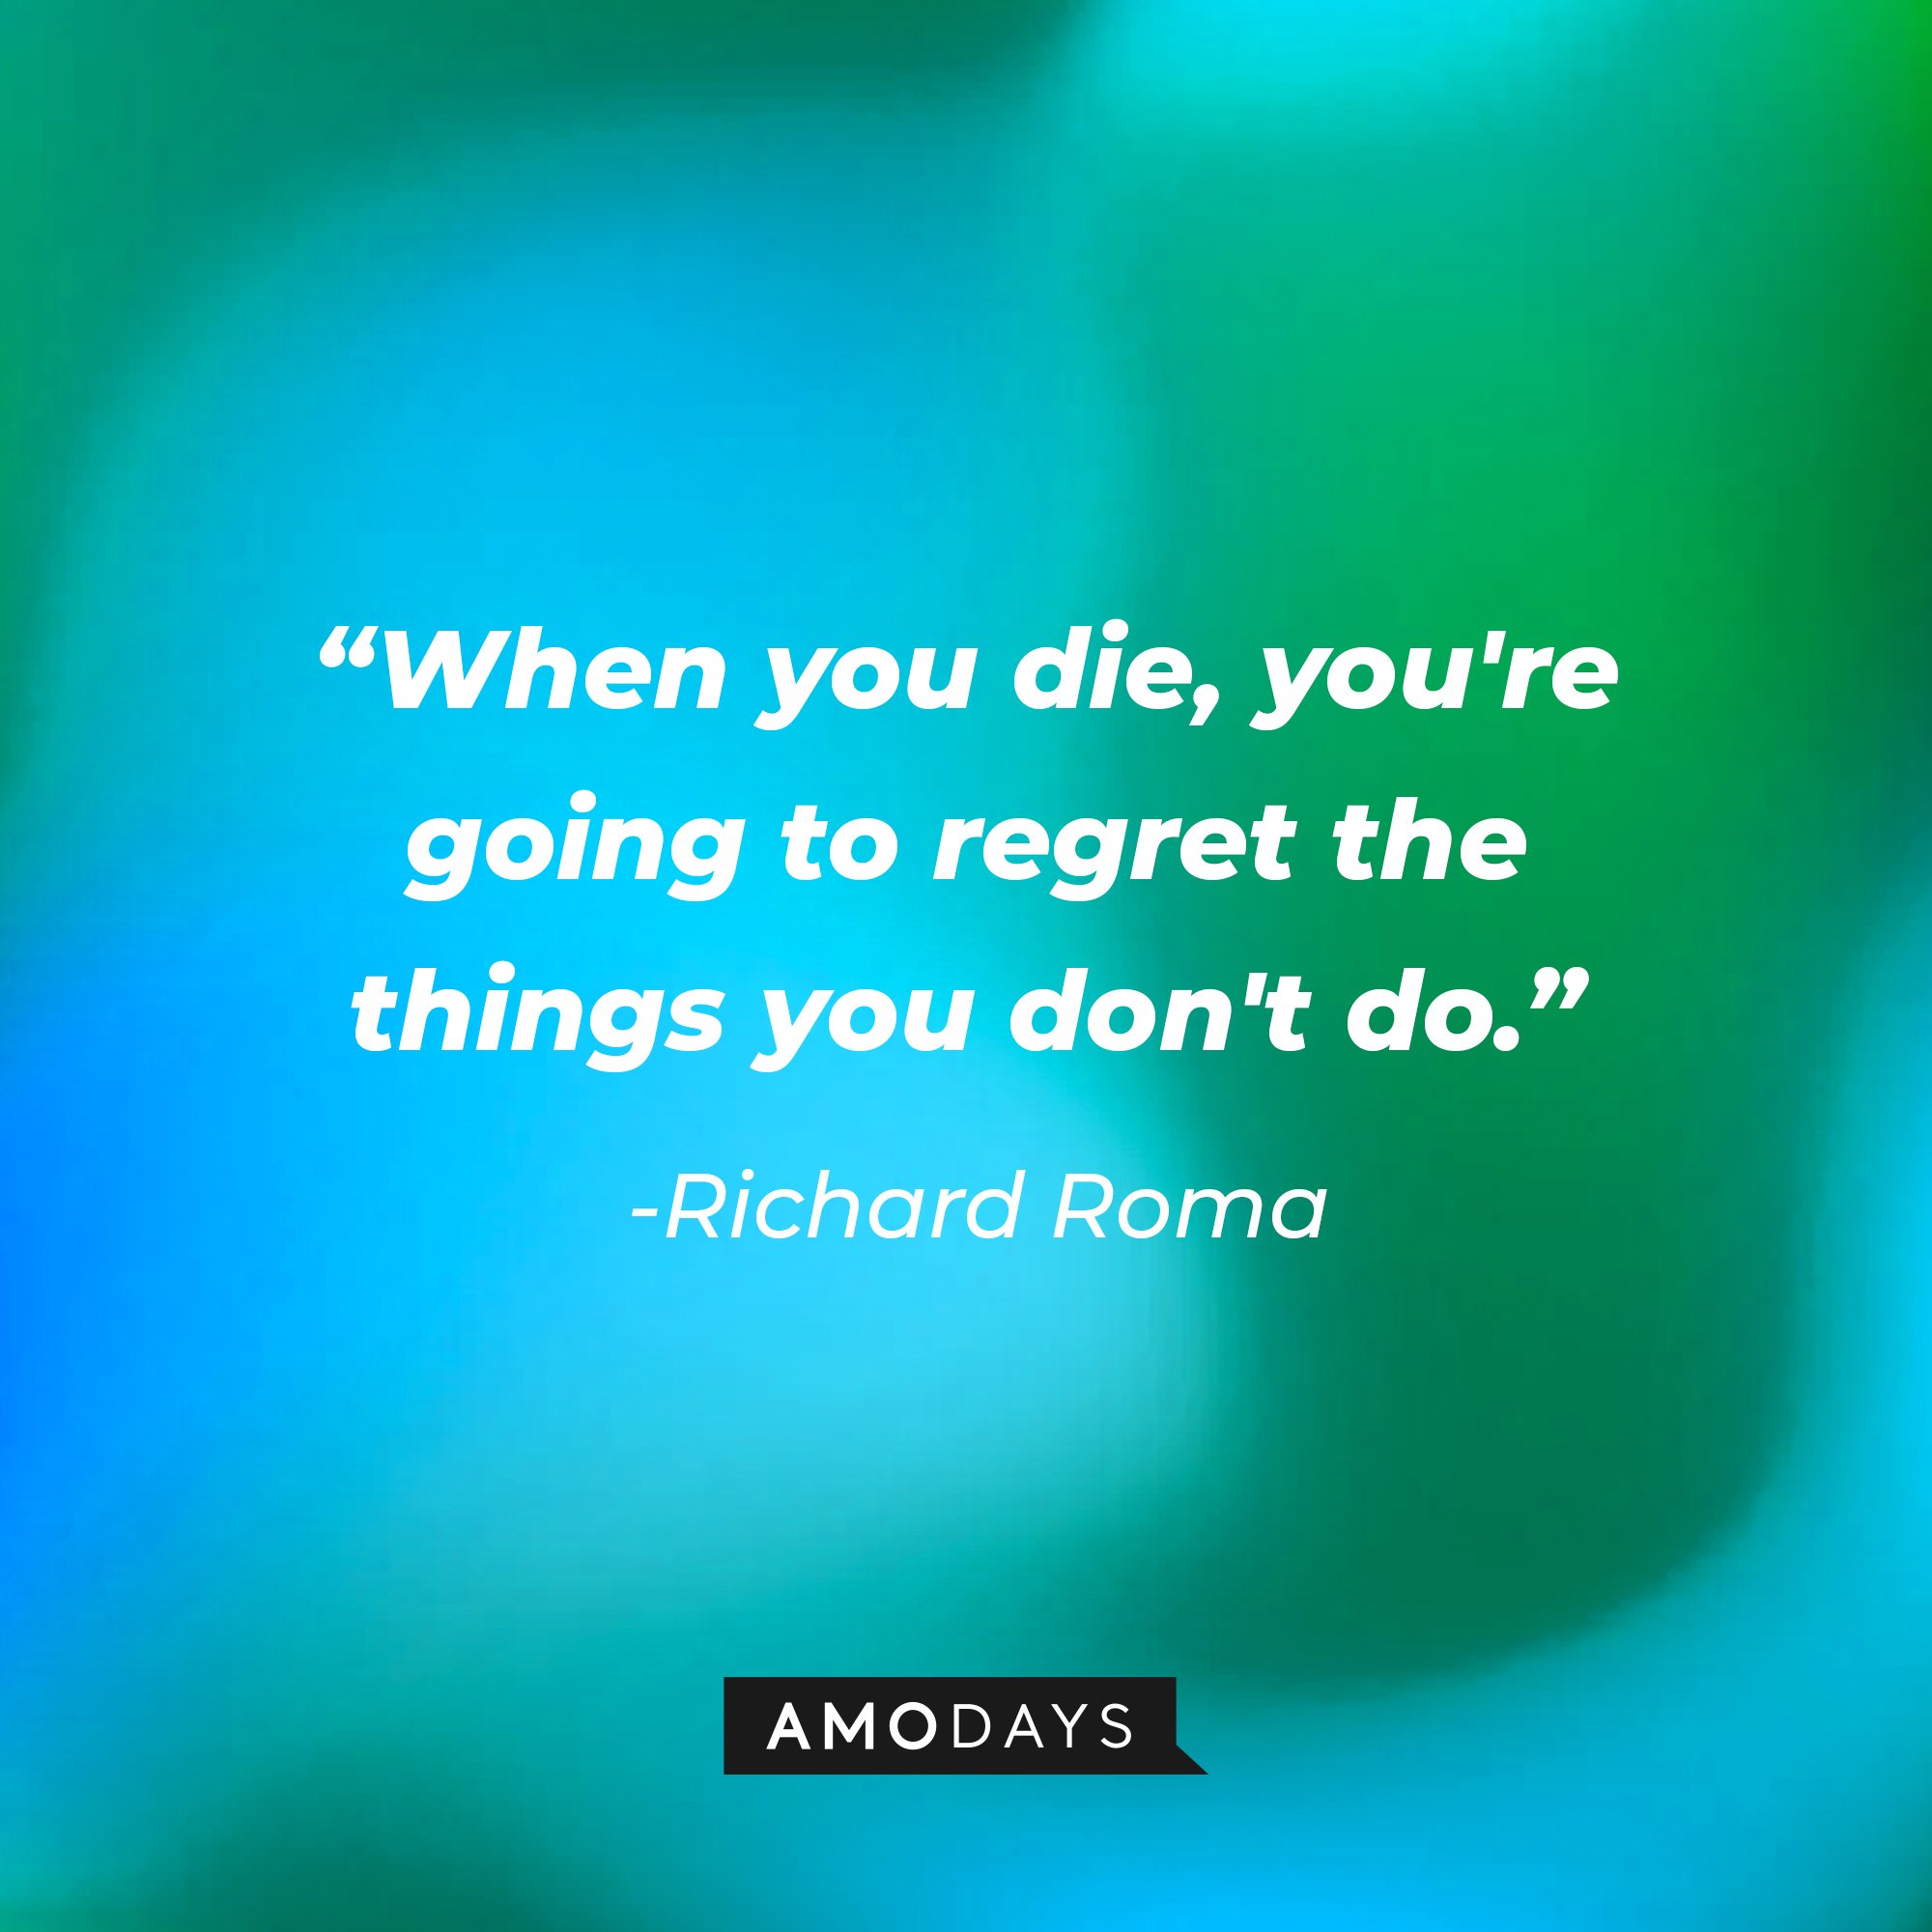 Richard Roma’s quote: "When you die, you're going to regret the things you don't do." | Image: AmoDays